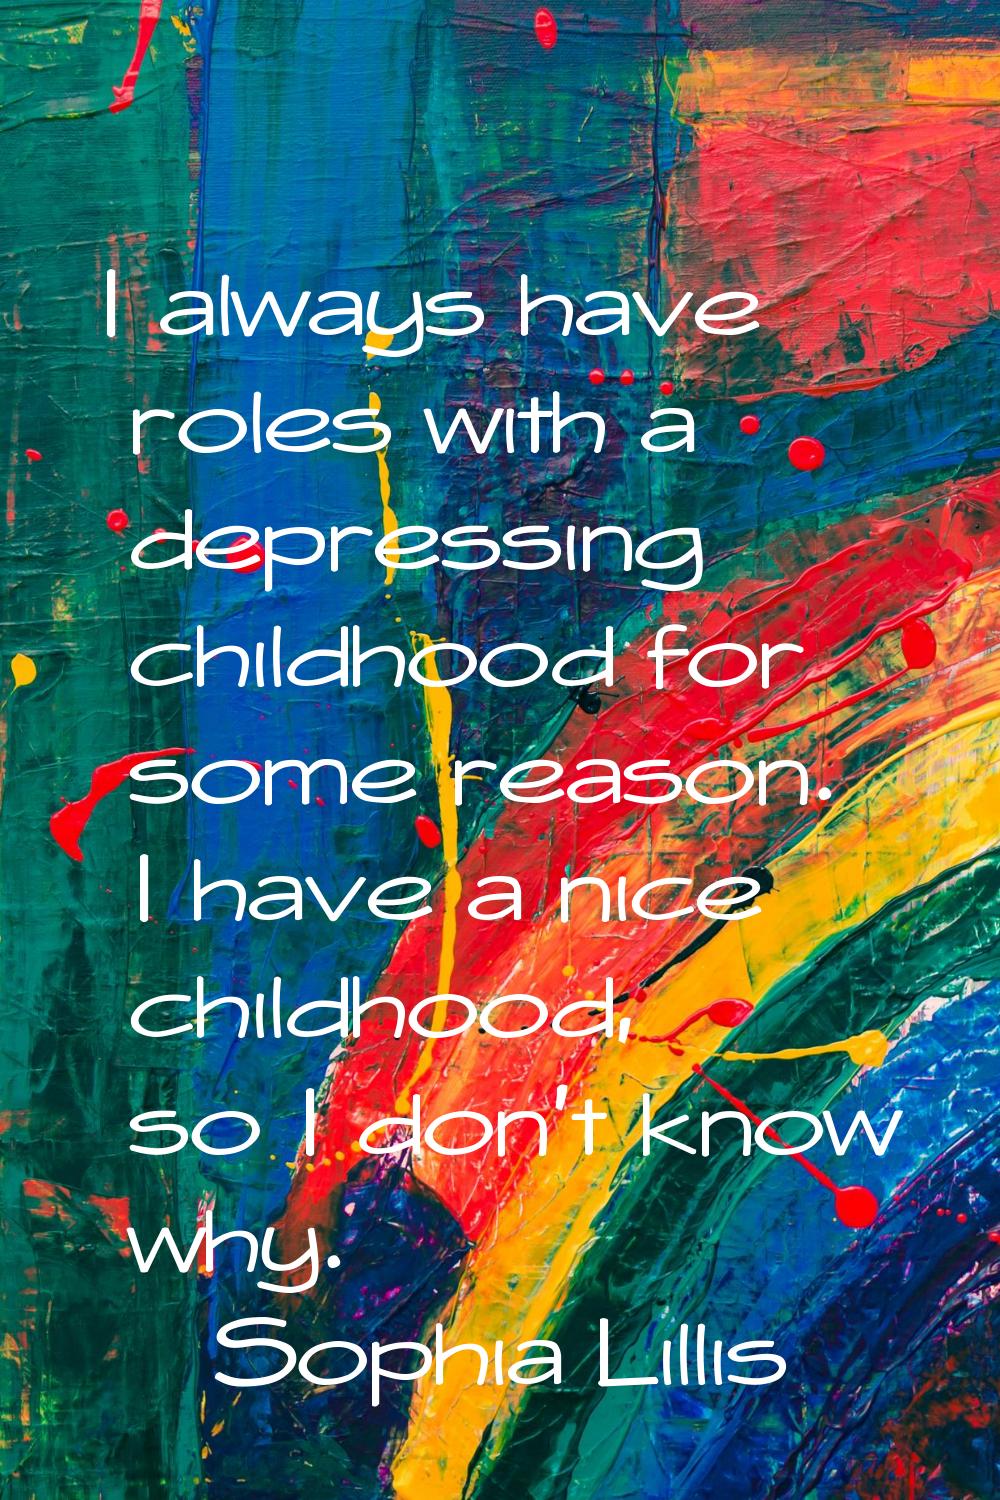 I always have roles with a depressing childhood for some reason. I have a nice childhood, so I don'